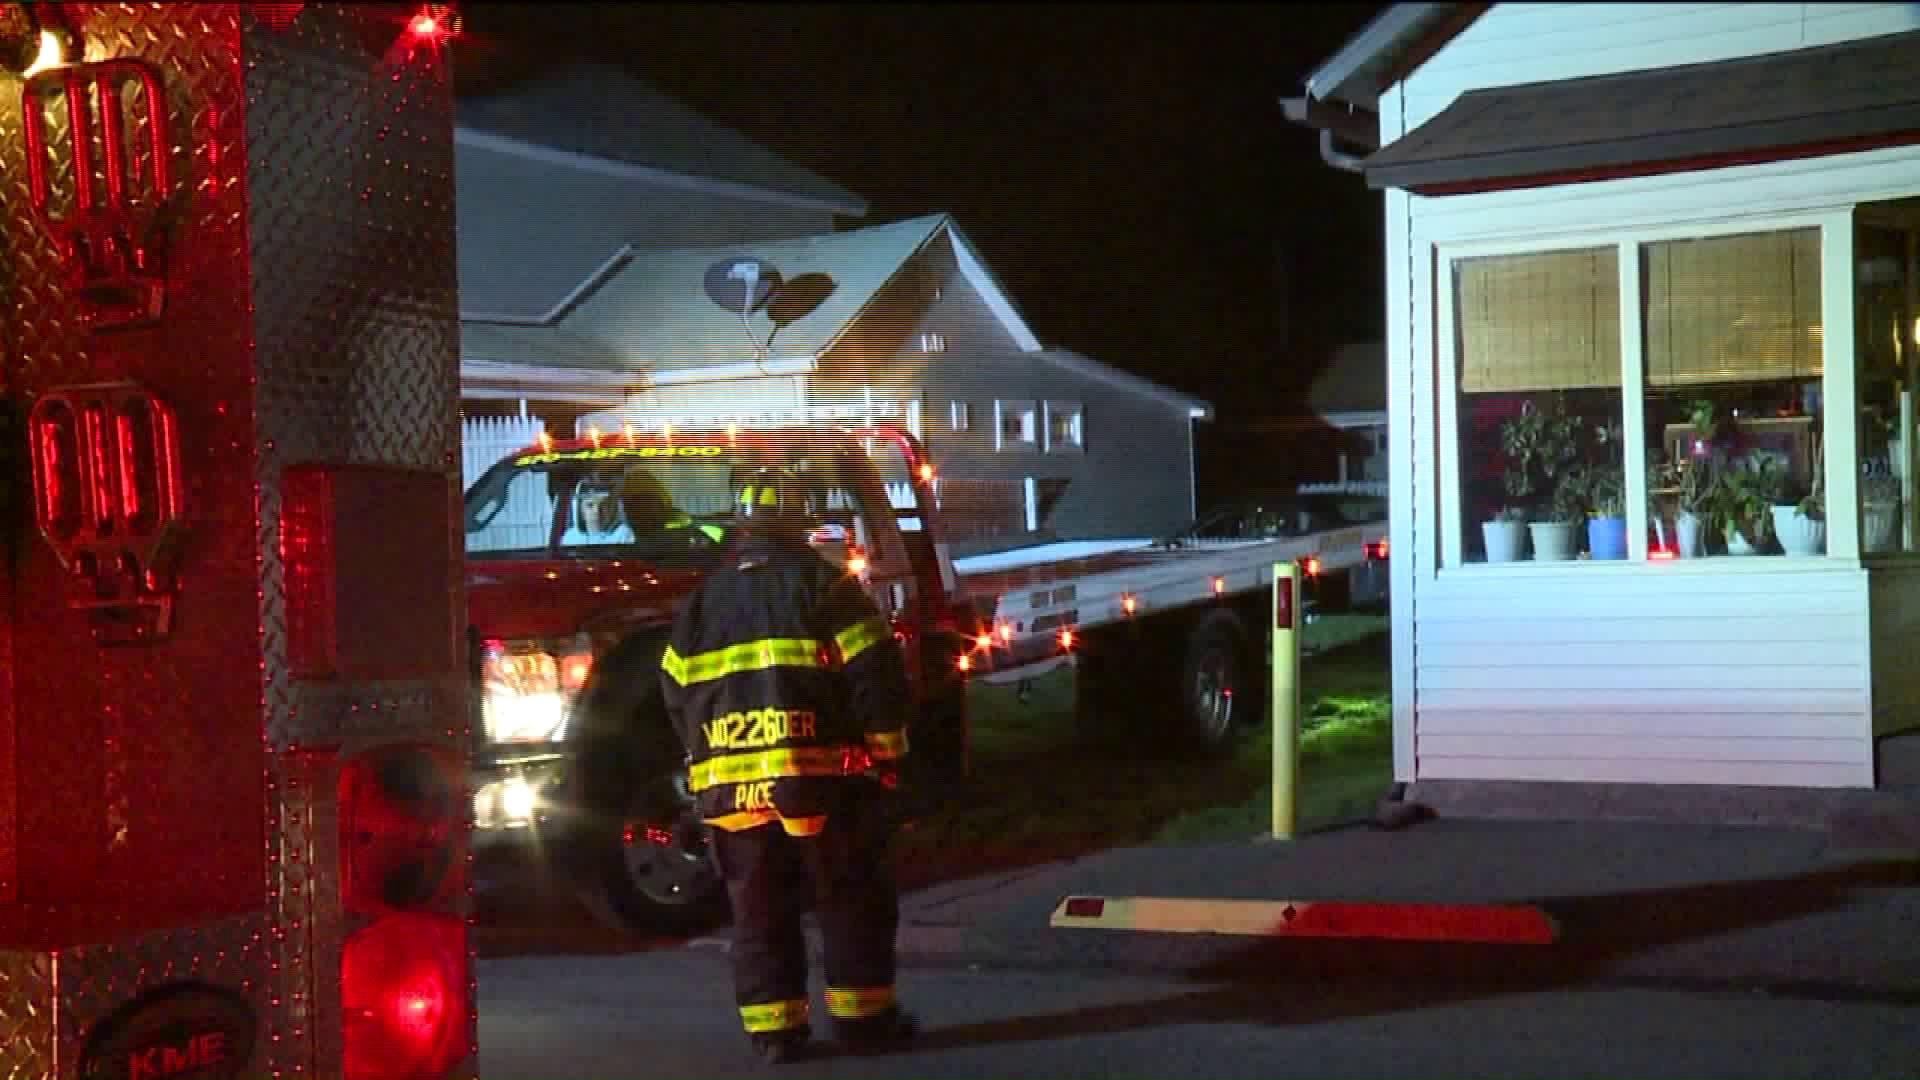 Driver Suspected of DUI After Crashing into House in Luzerne County